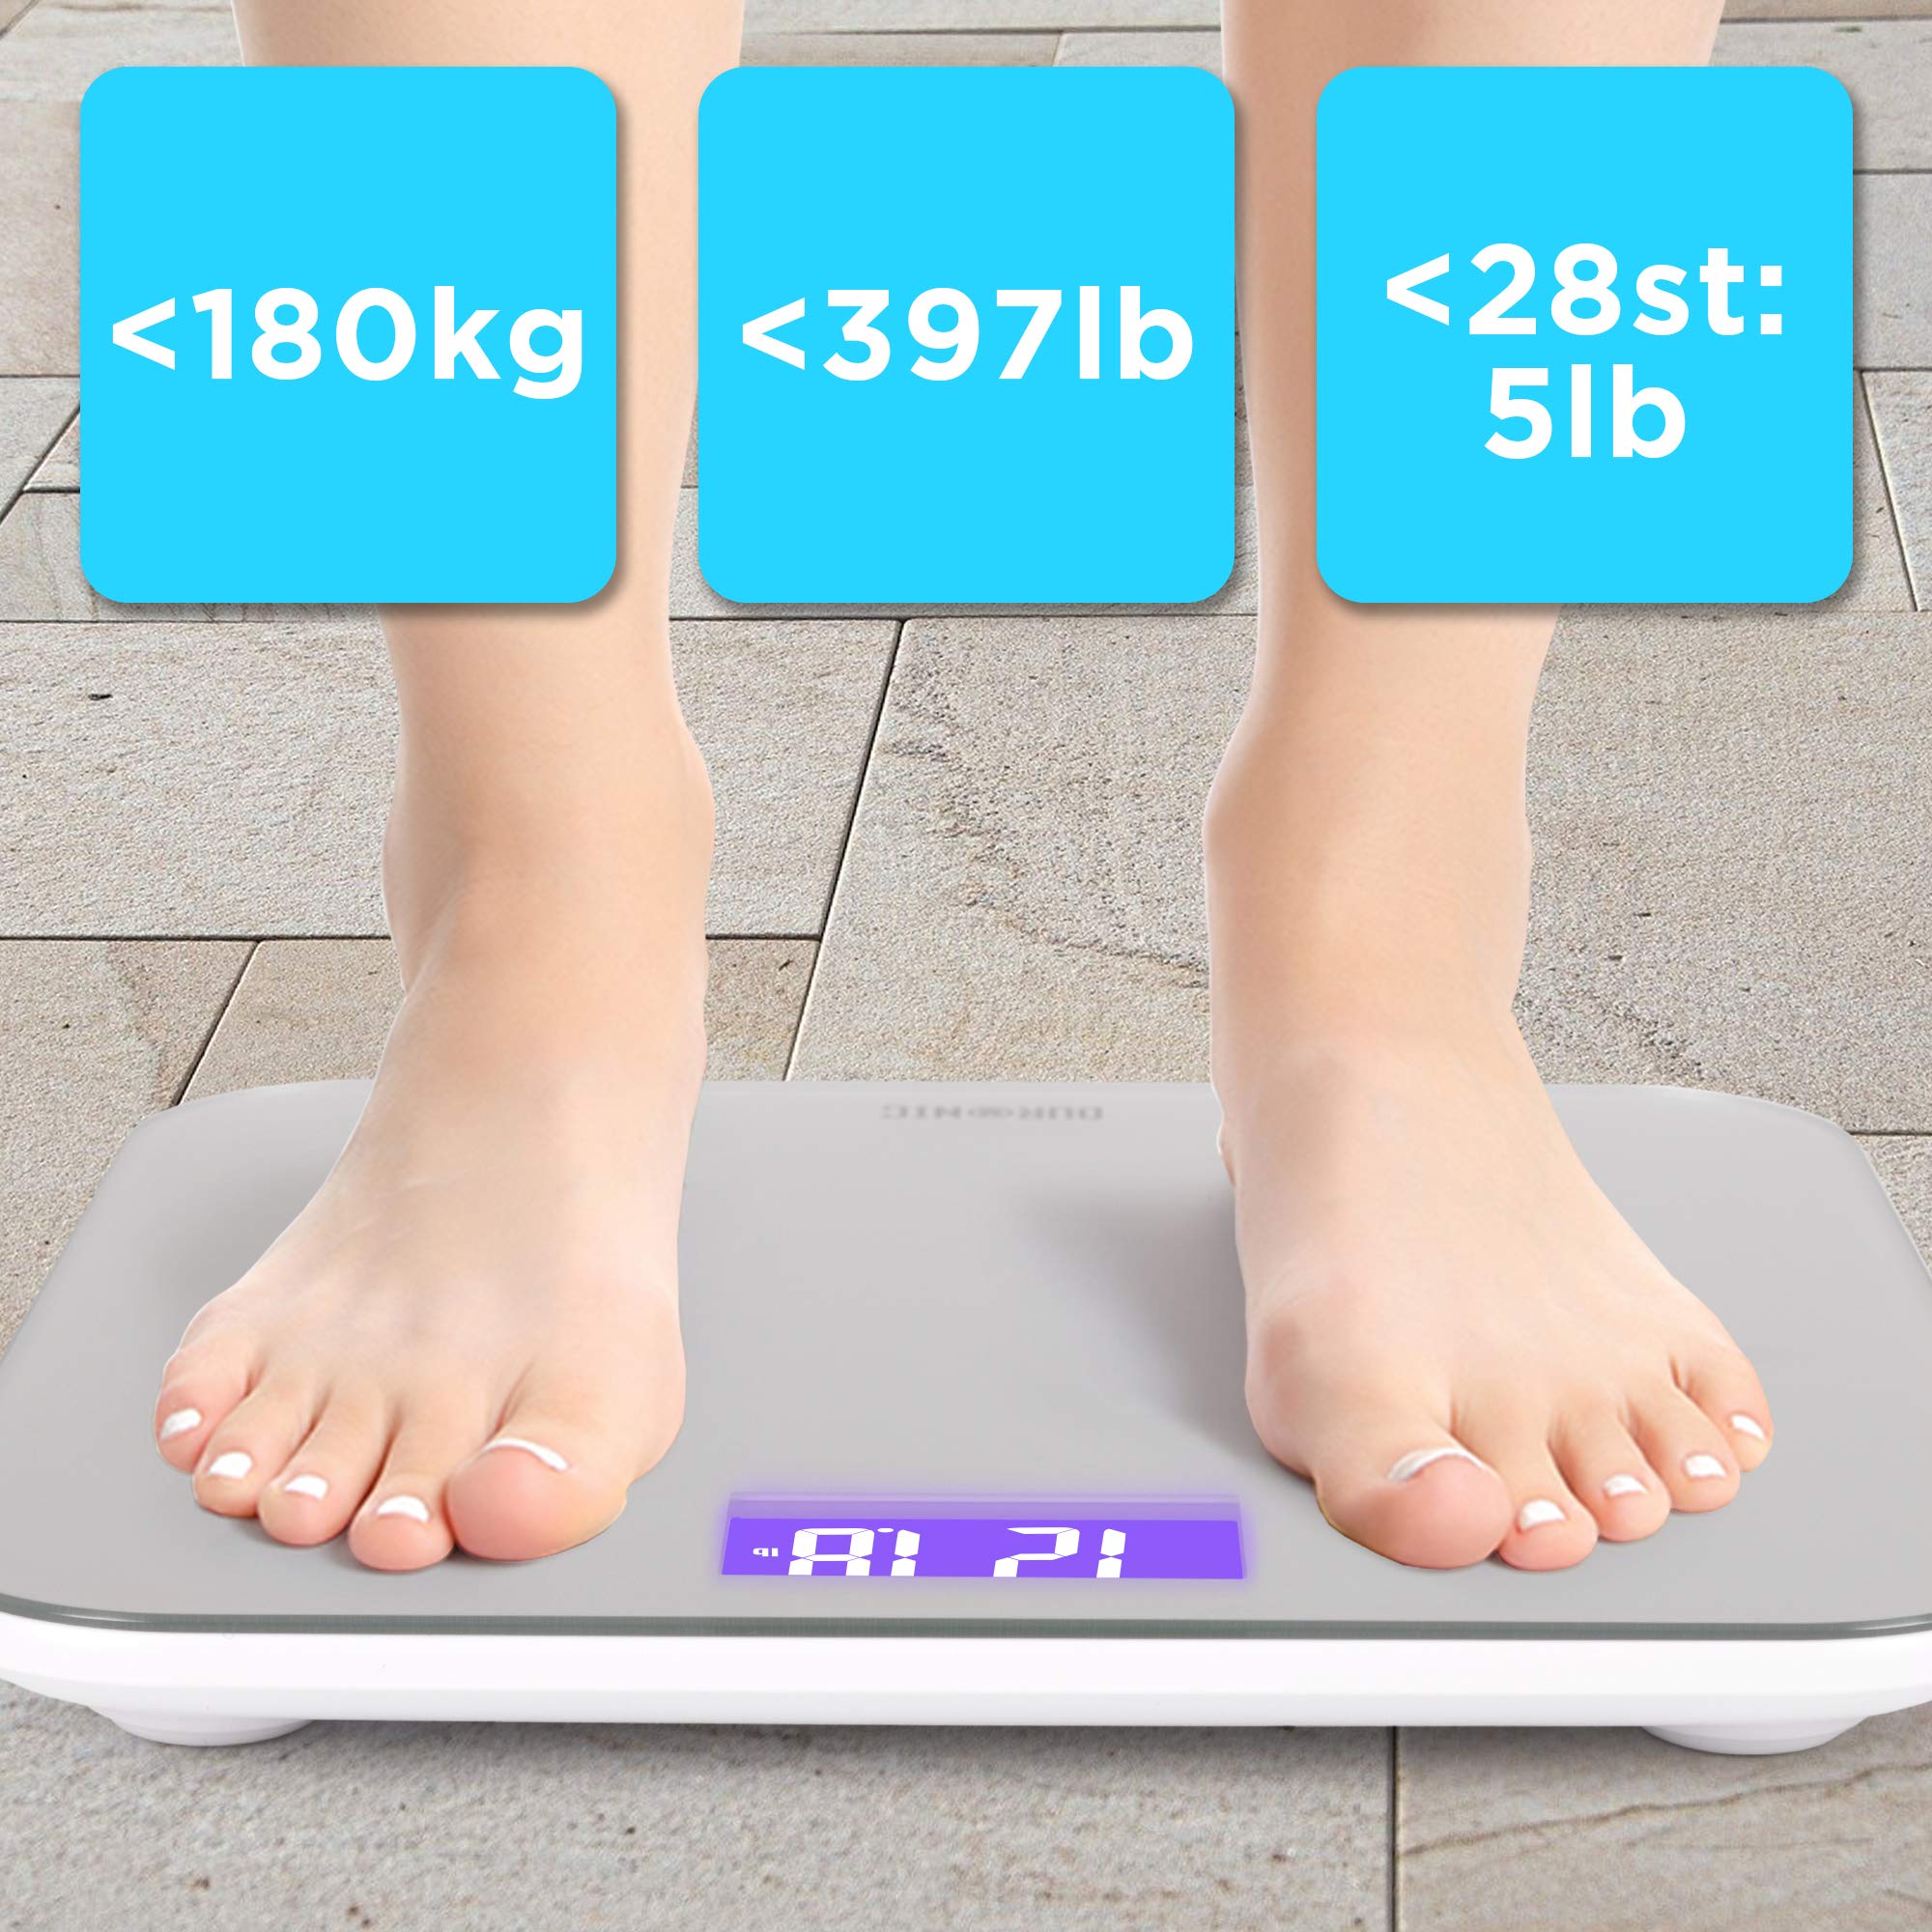 Duronic Digital Bathroom Body Scales BS603 | Measures Body Weight in Kilograms, Pounds and Stones | Silver Glass Design with Purple Backlight | Step-On Activation | Precision Sensors | 180kg Capacity